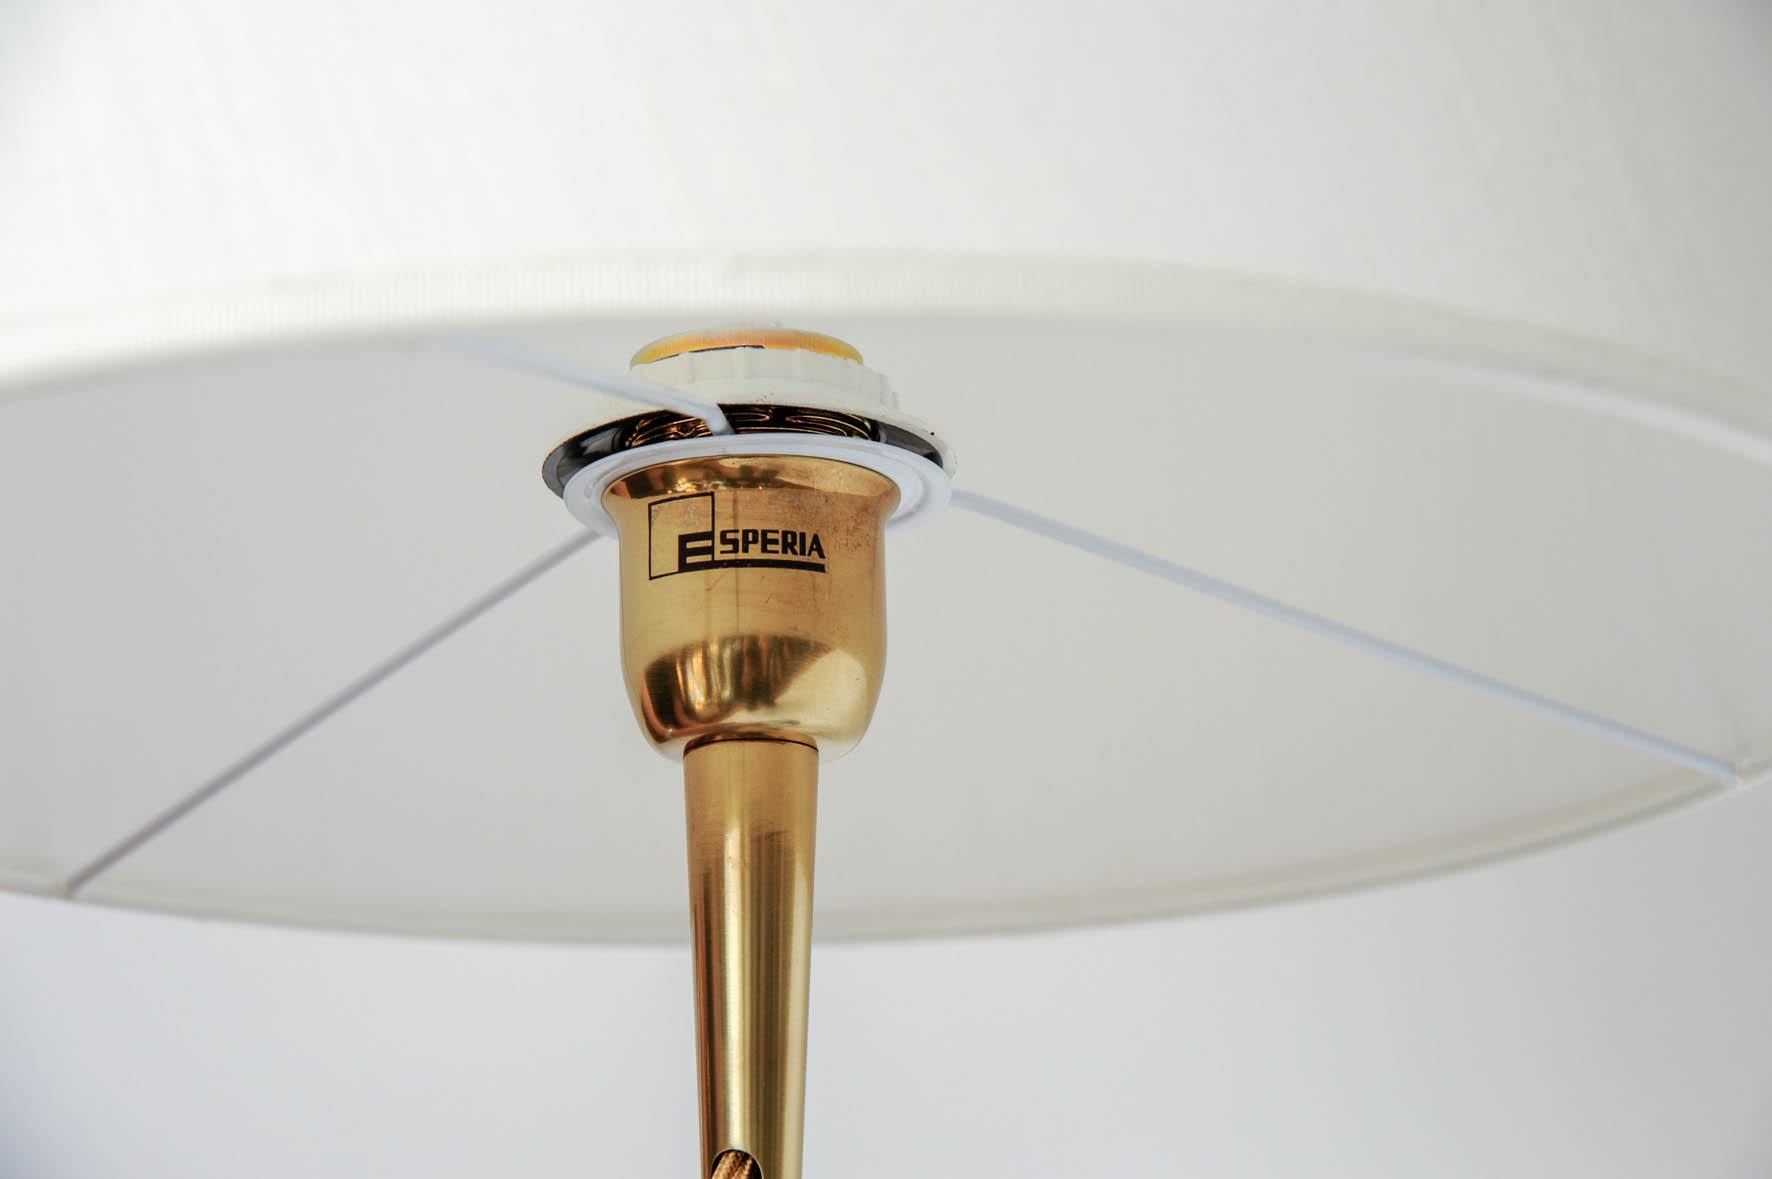 Contemporary Pair of Unique Table Lamps in Murano Glass by Esperia for Glustin Luminaires